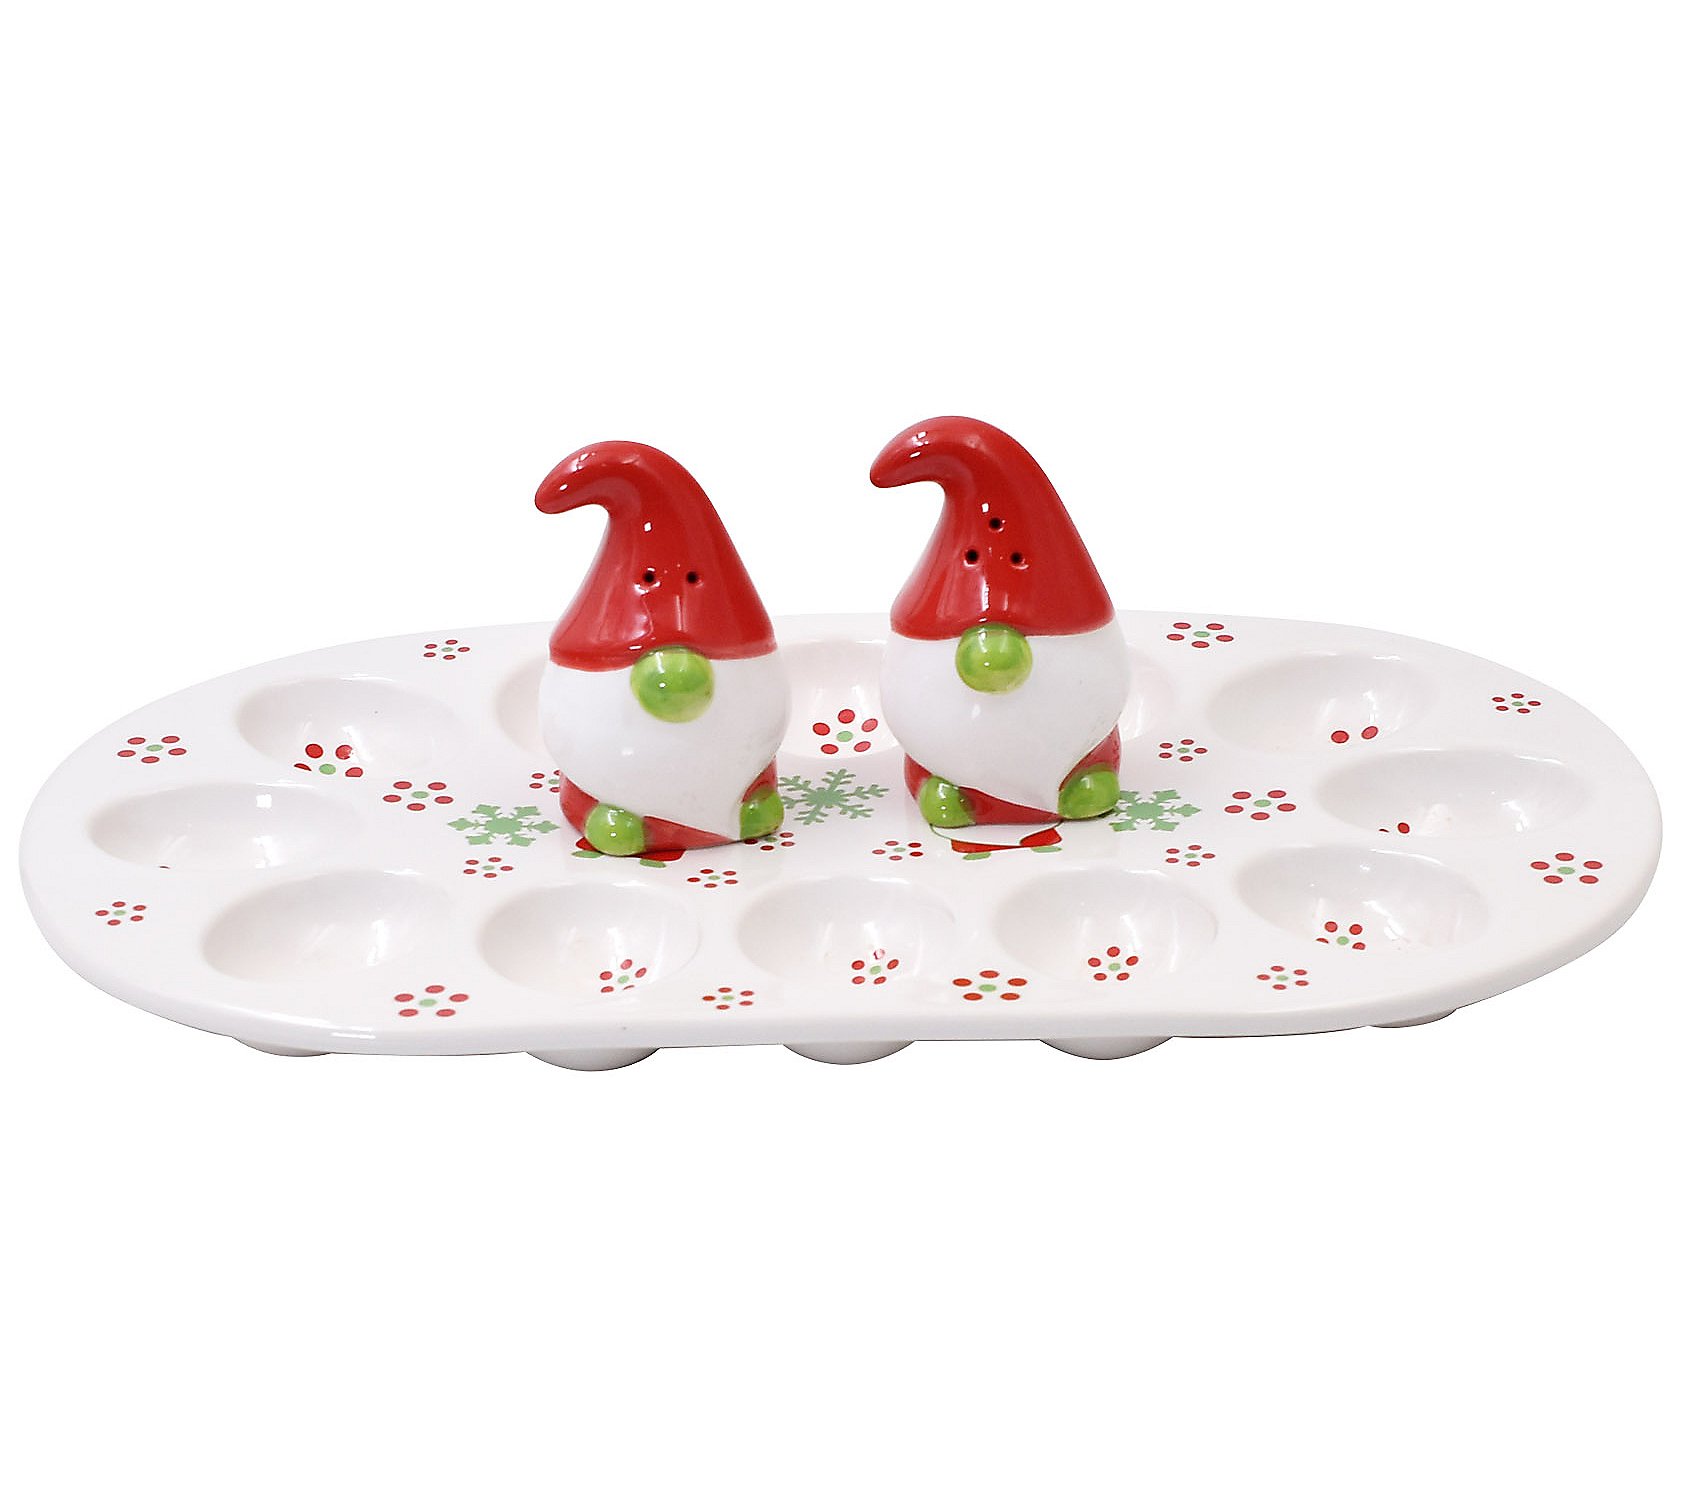 Temp-tations Egg Plate with Salt and Pepper Shakers